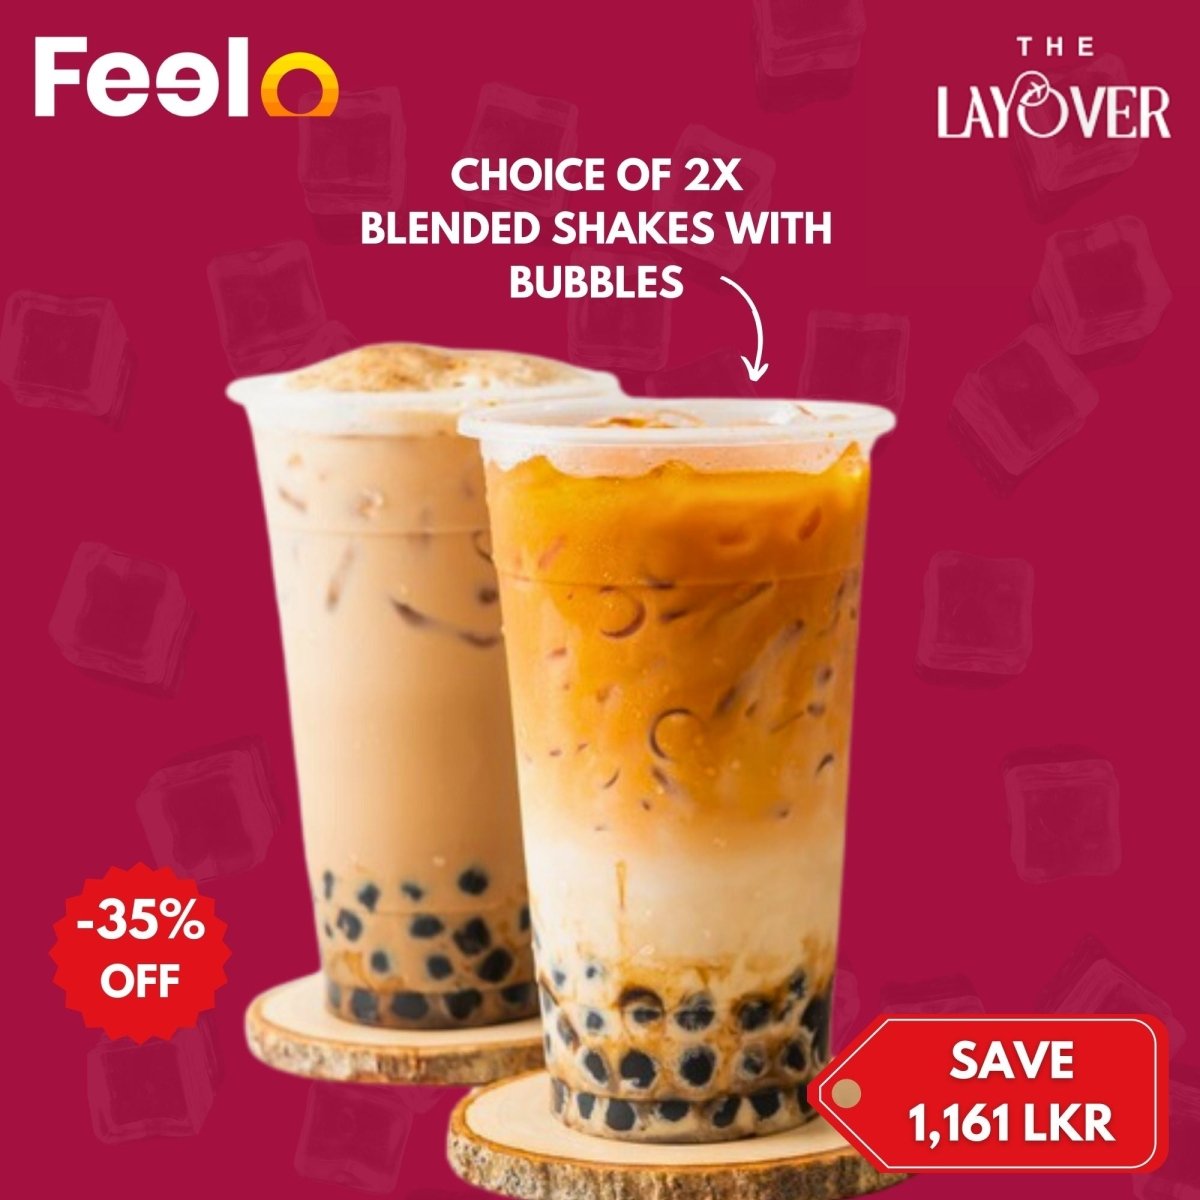 2x blended shakes with bubbles (Tapioca Black Pearls) of your choice in a relaxing atmosphere. - The Layover, Marine Drive, Colombo 03 | Feelo